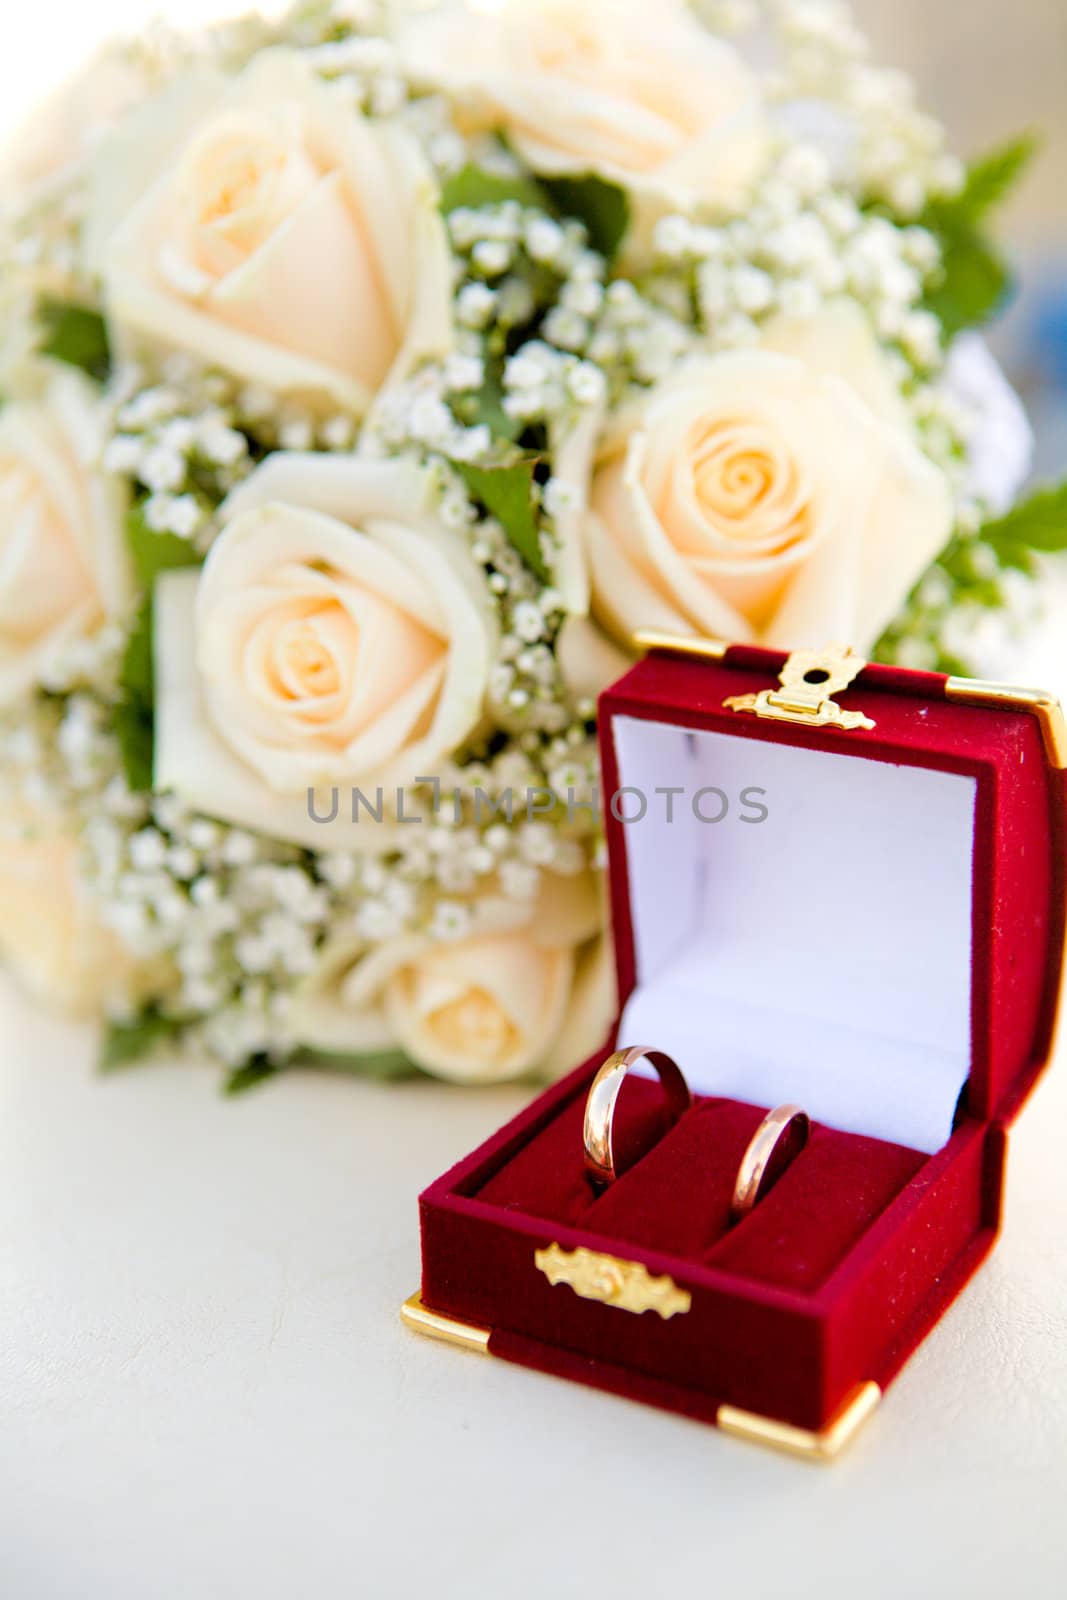 wedding rings in red box near bouquet on table